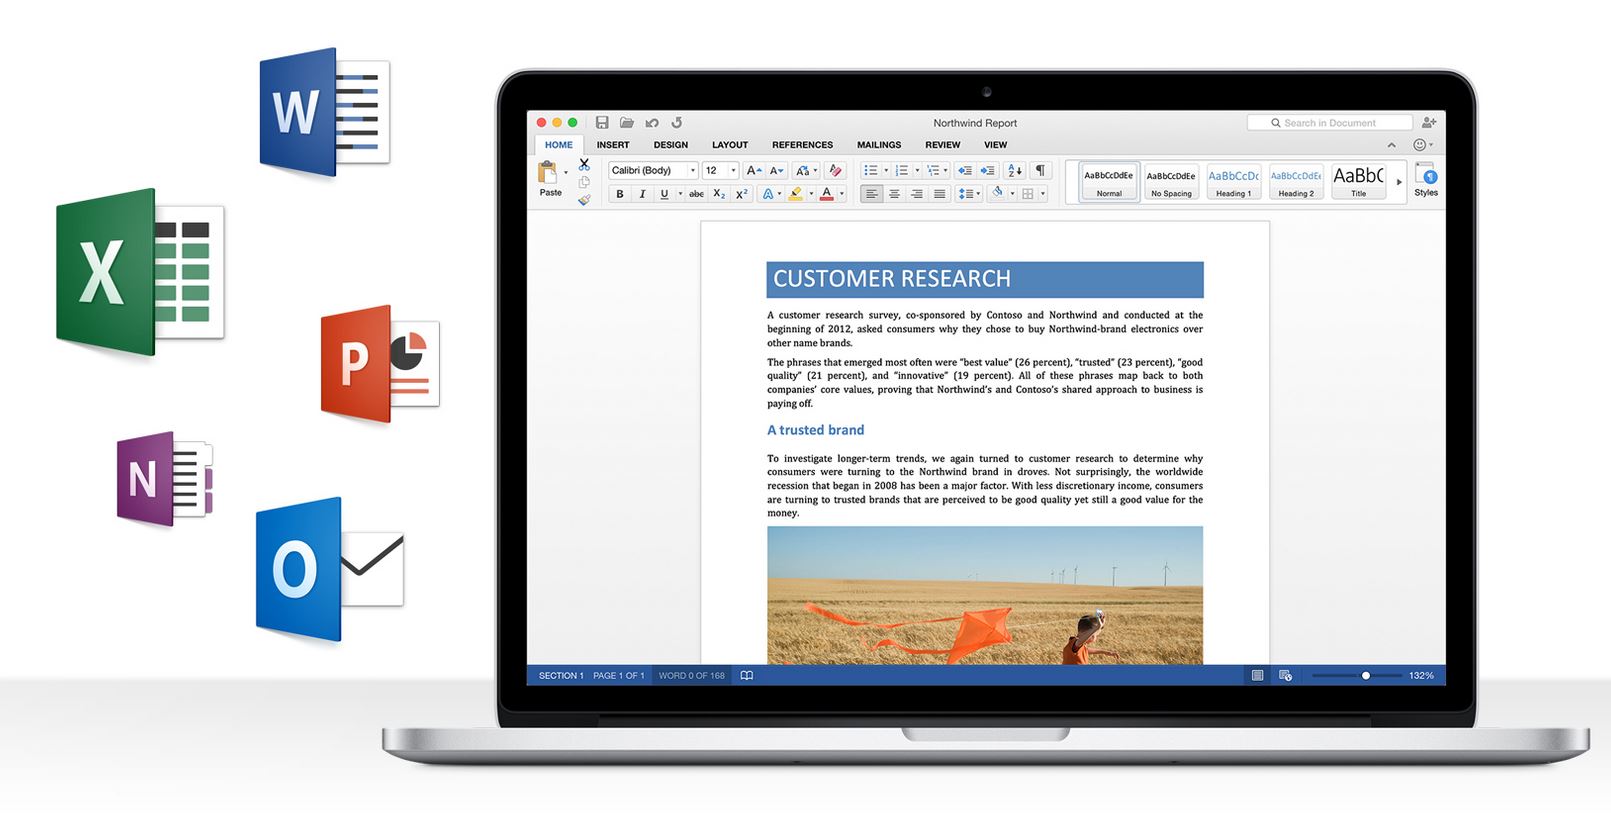 Microsoft releases new Mac Office Preview Build for Beta Channel Insiders